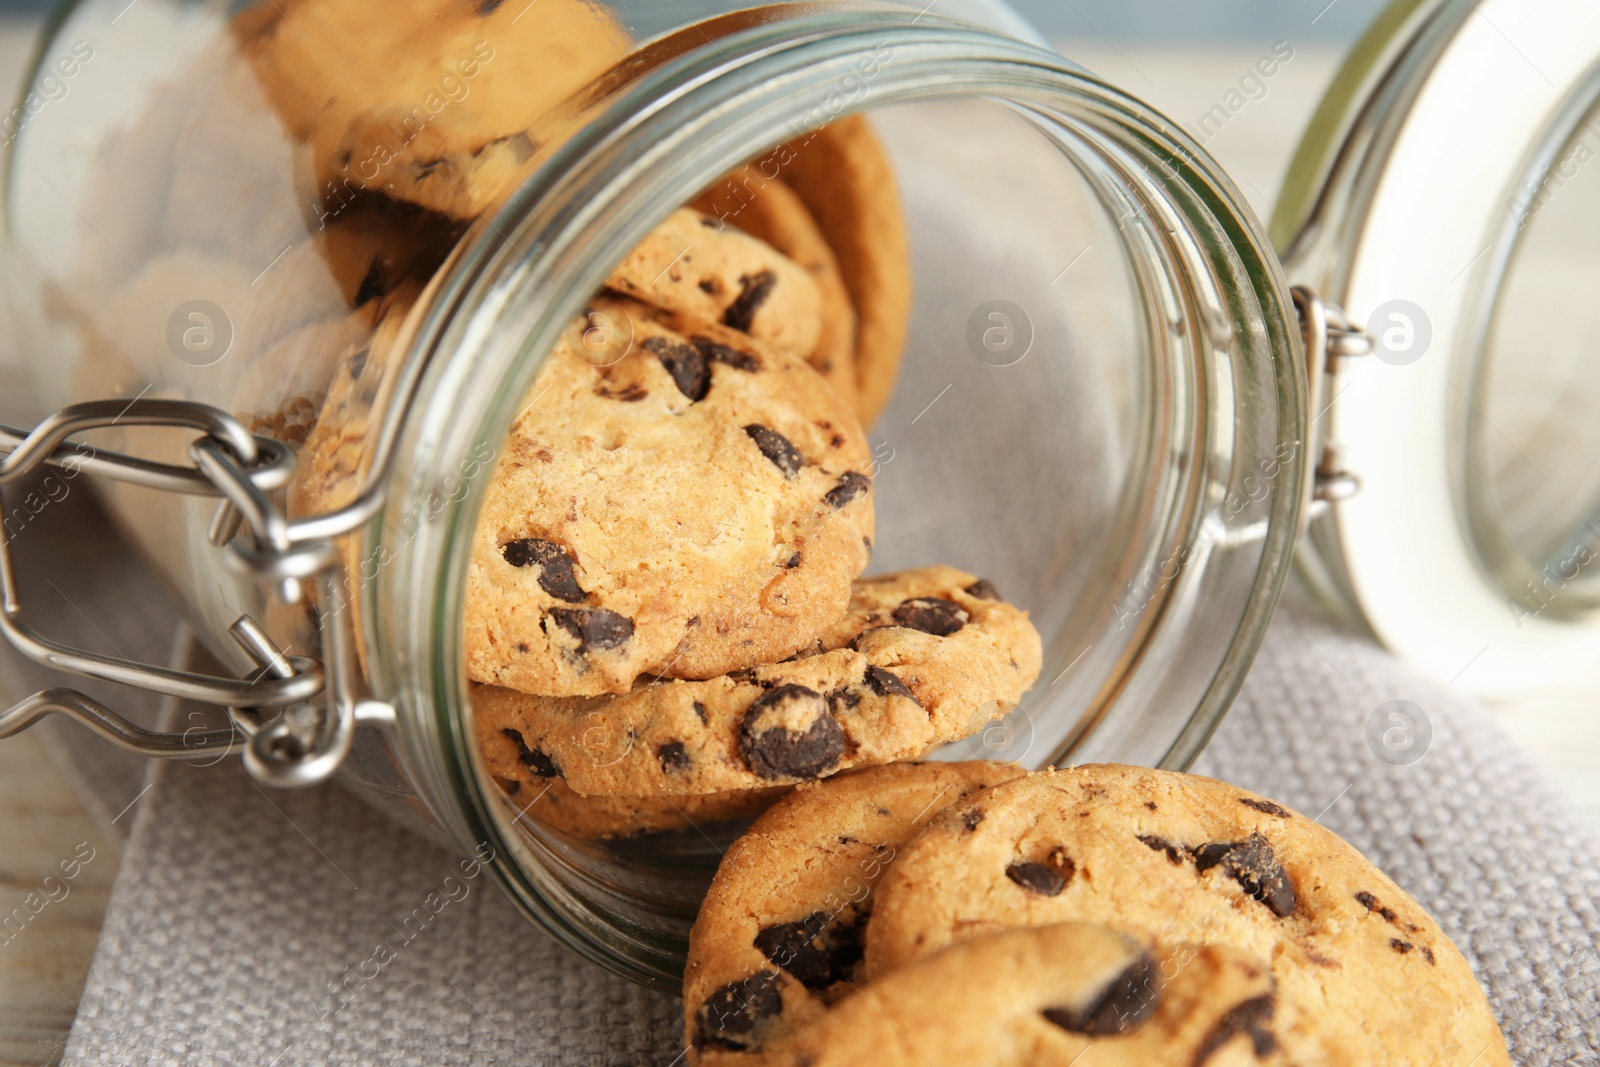 Photo of Jar of tasty chocolate chip cookies on table